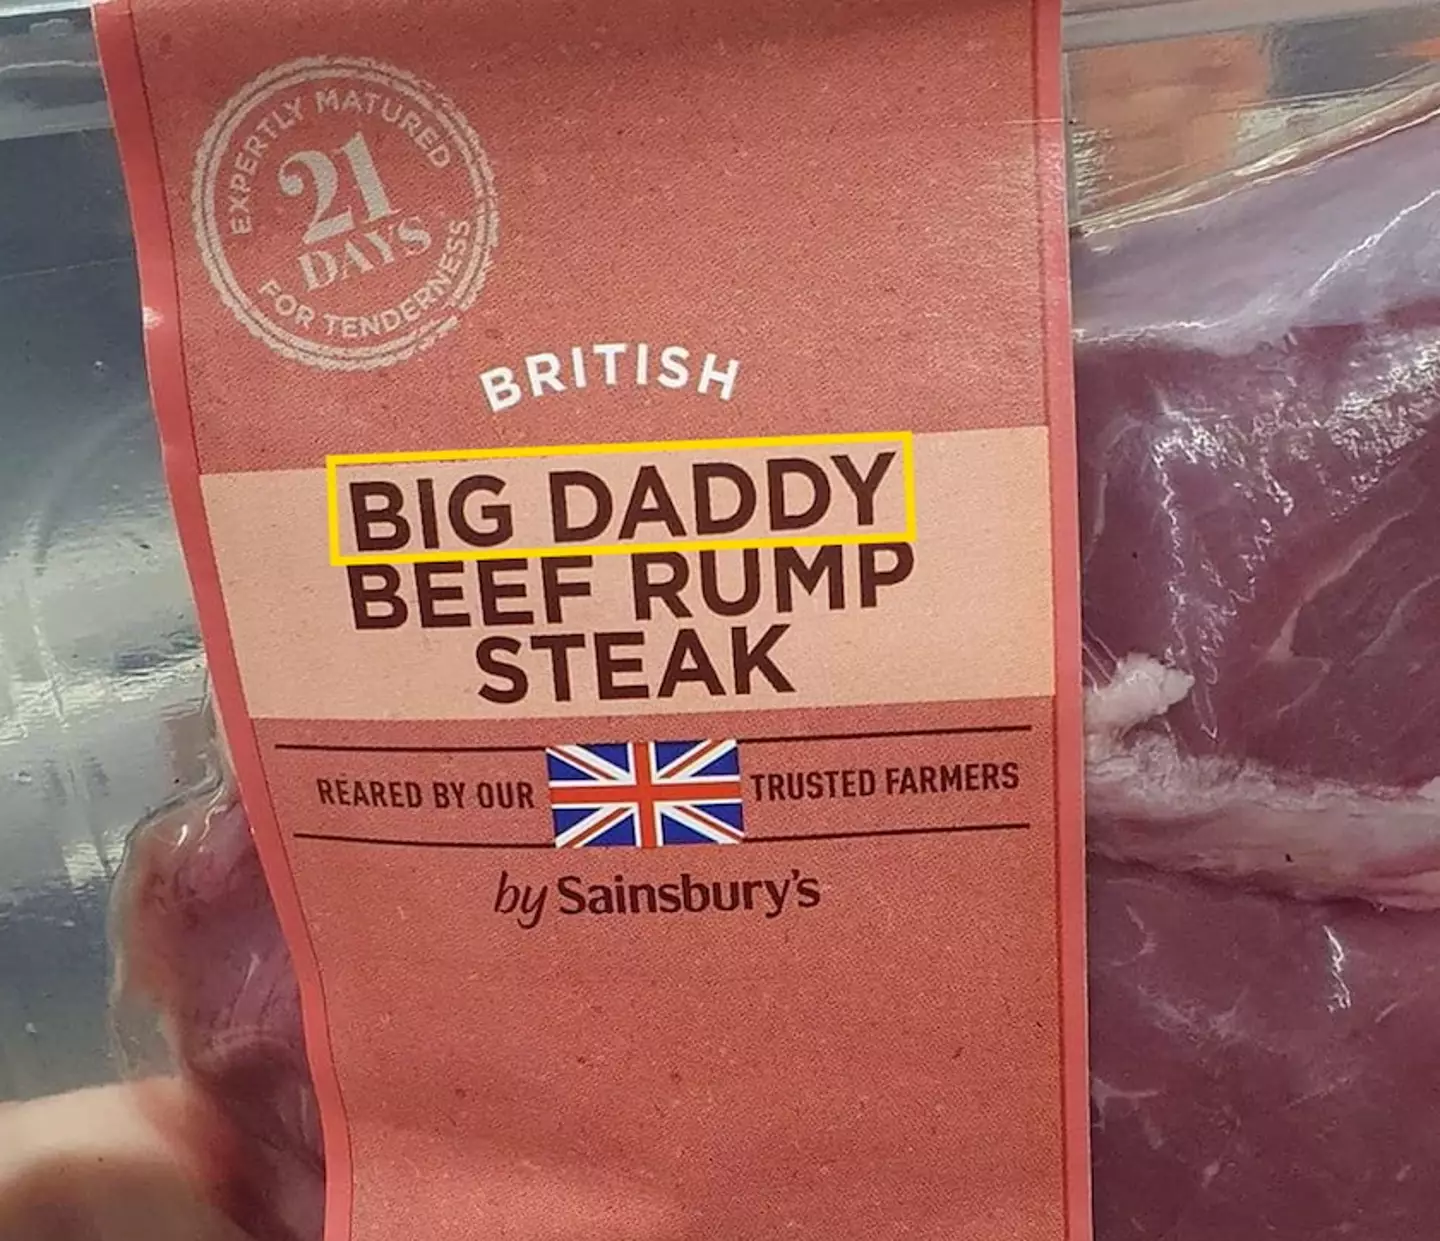 The steak has been named 'Big Daddy'.